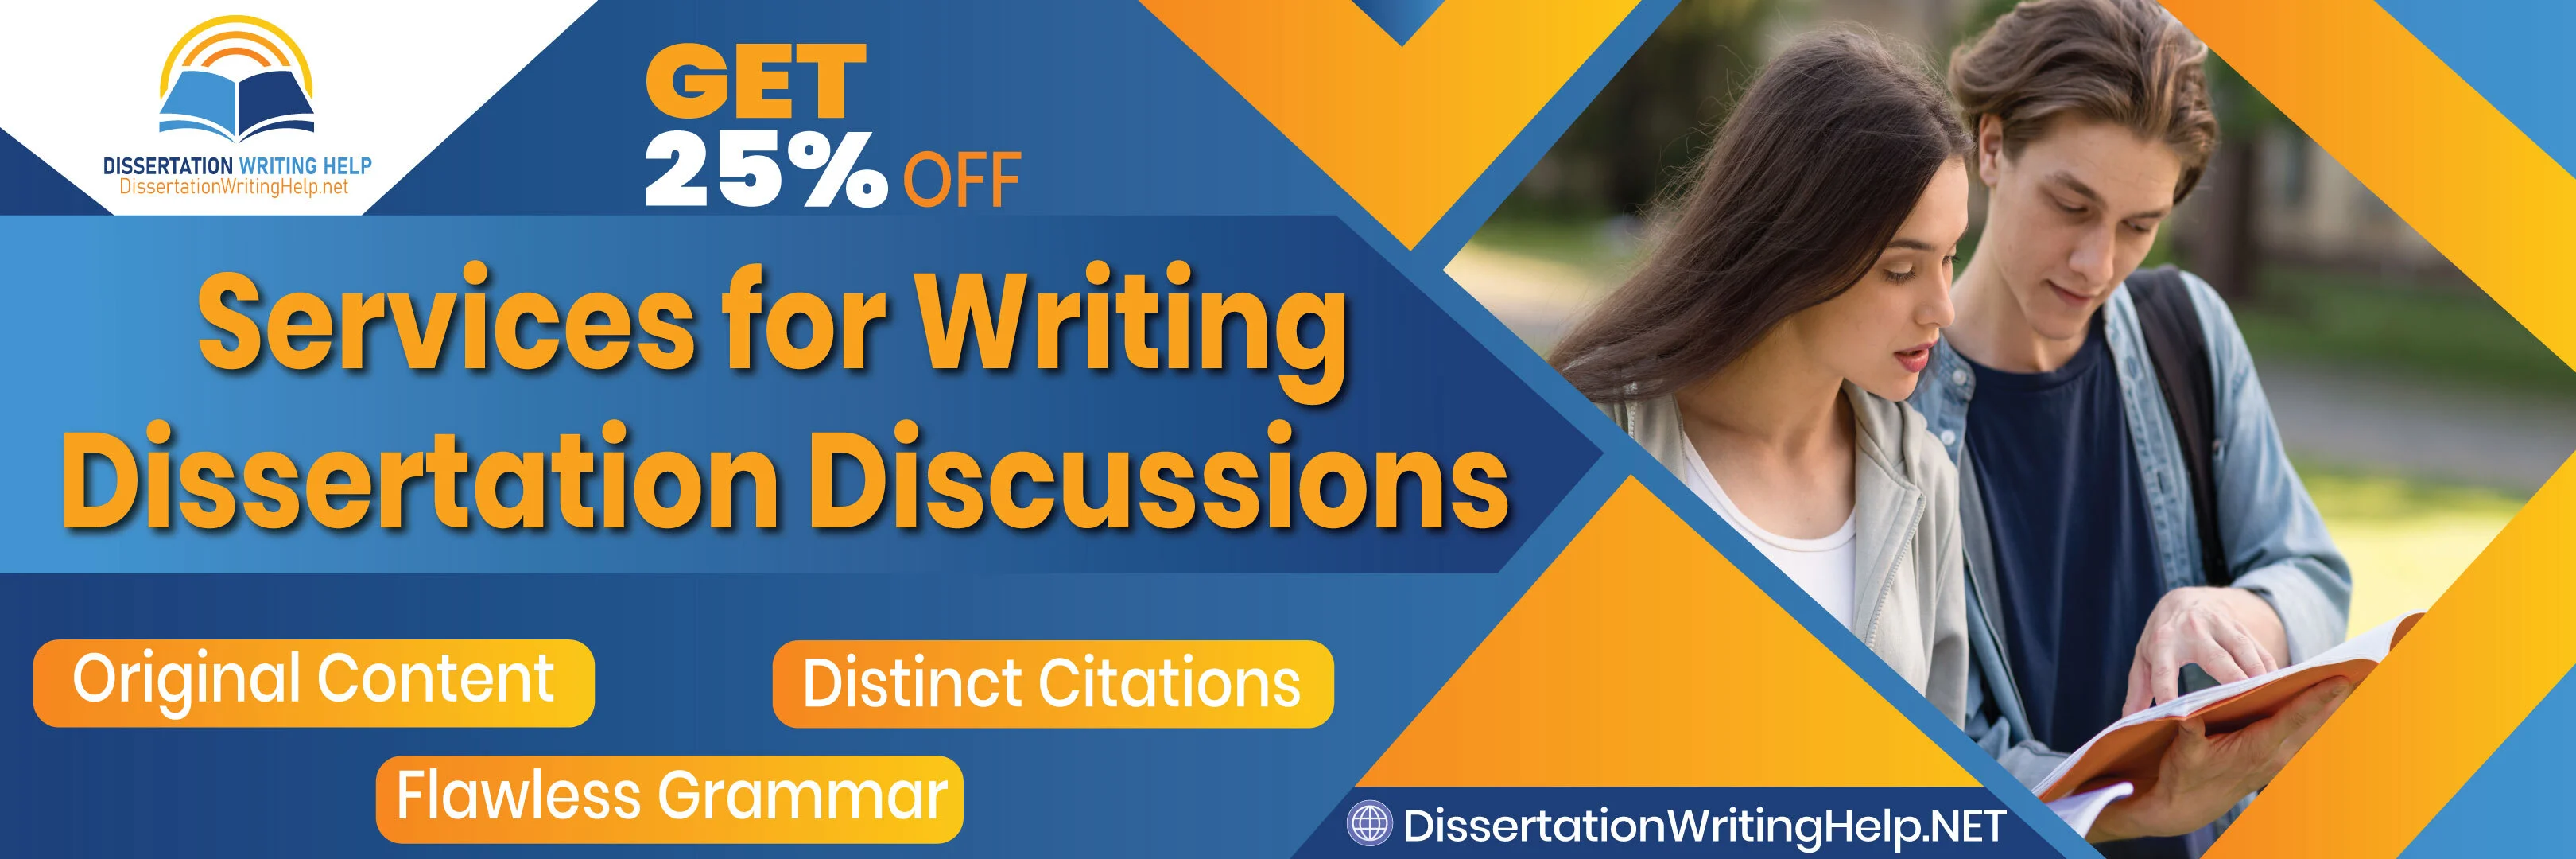 Services for Writing Dissertation Discussions